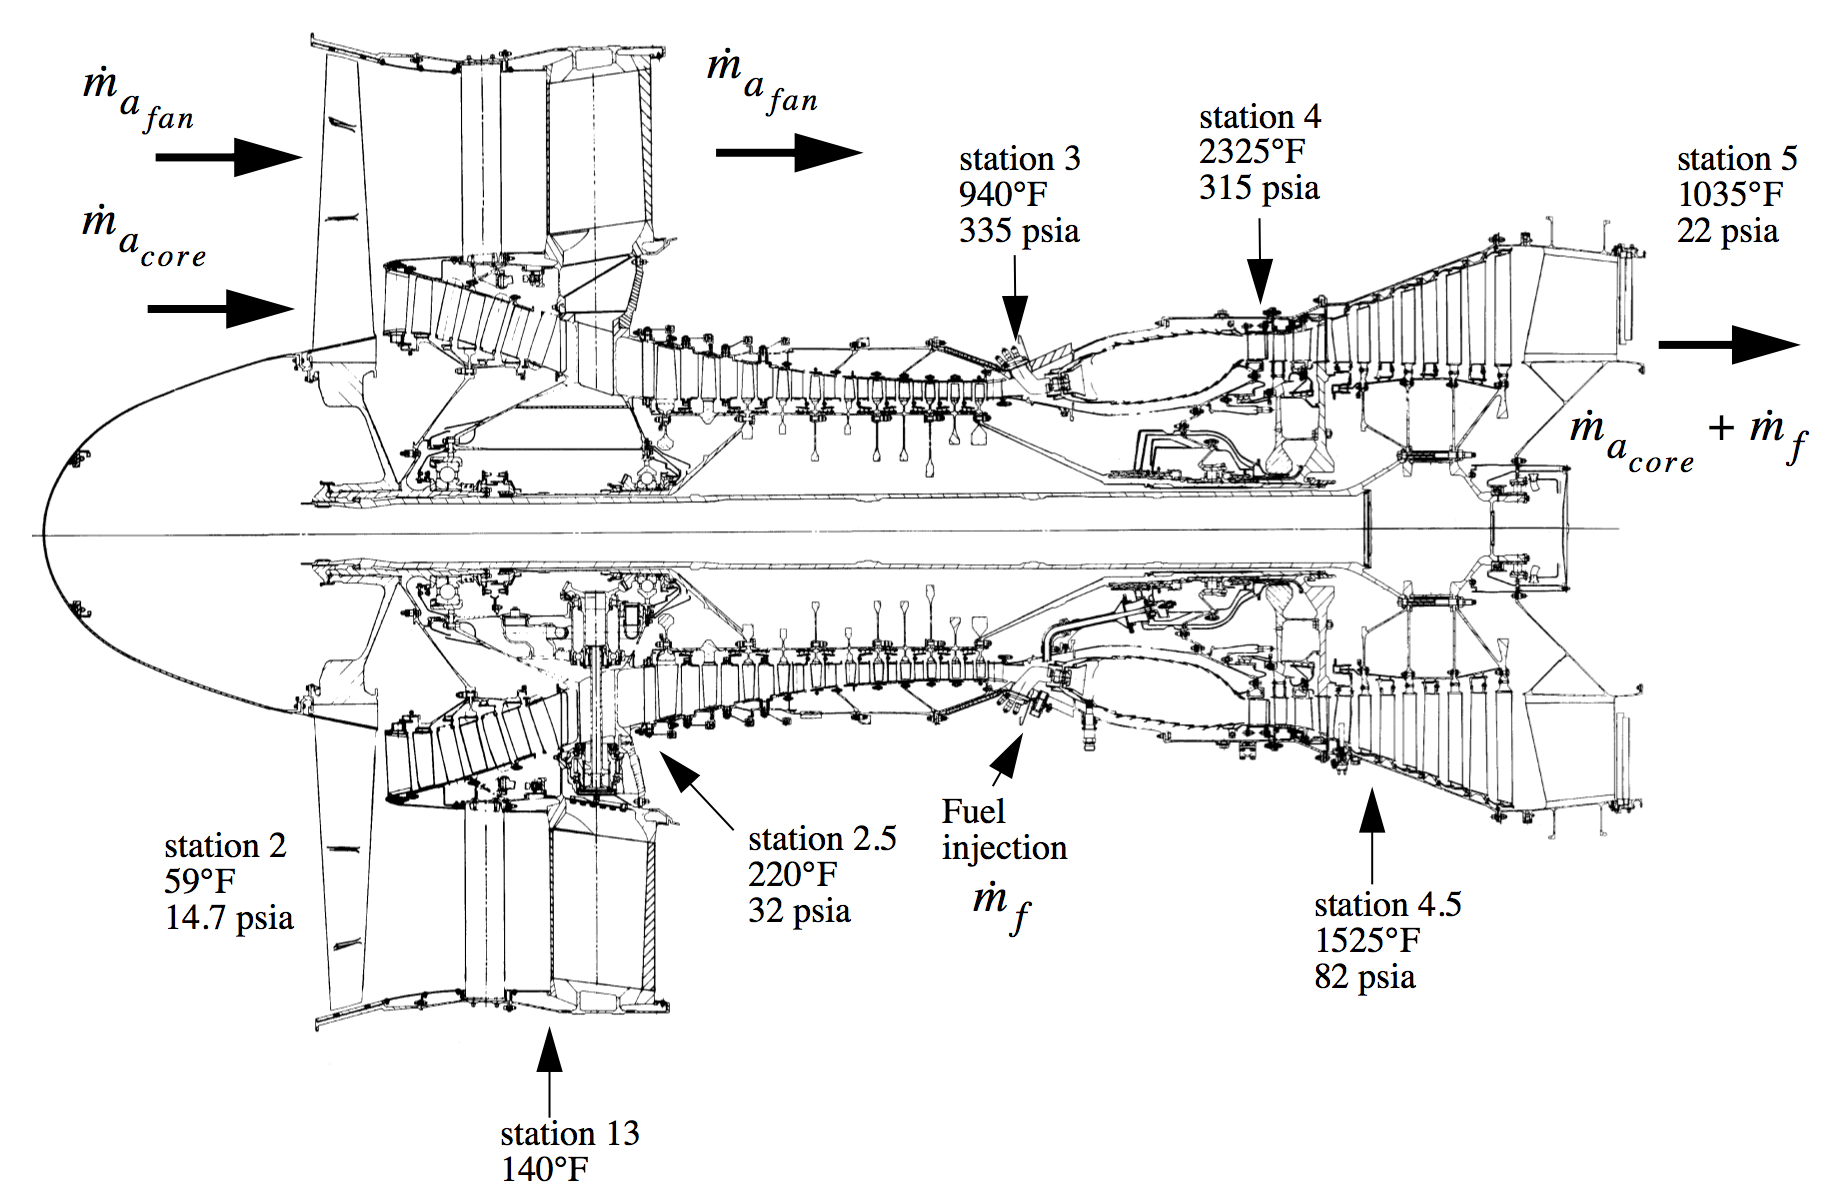 Cross-section of the Pratt and Whitney JT9D-7 turbofan engine with typical temperatures and pressures labeled at various stations throughout the engine. Source: Aircraft and Rocket Propulsion, Brian J. Cantwell, Stanford University (Click image to enlarge.)